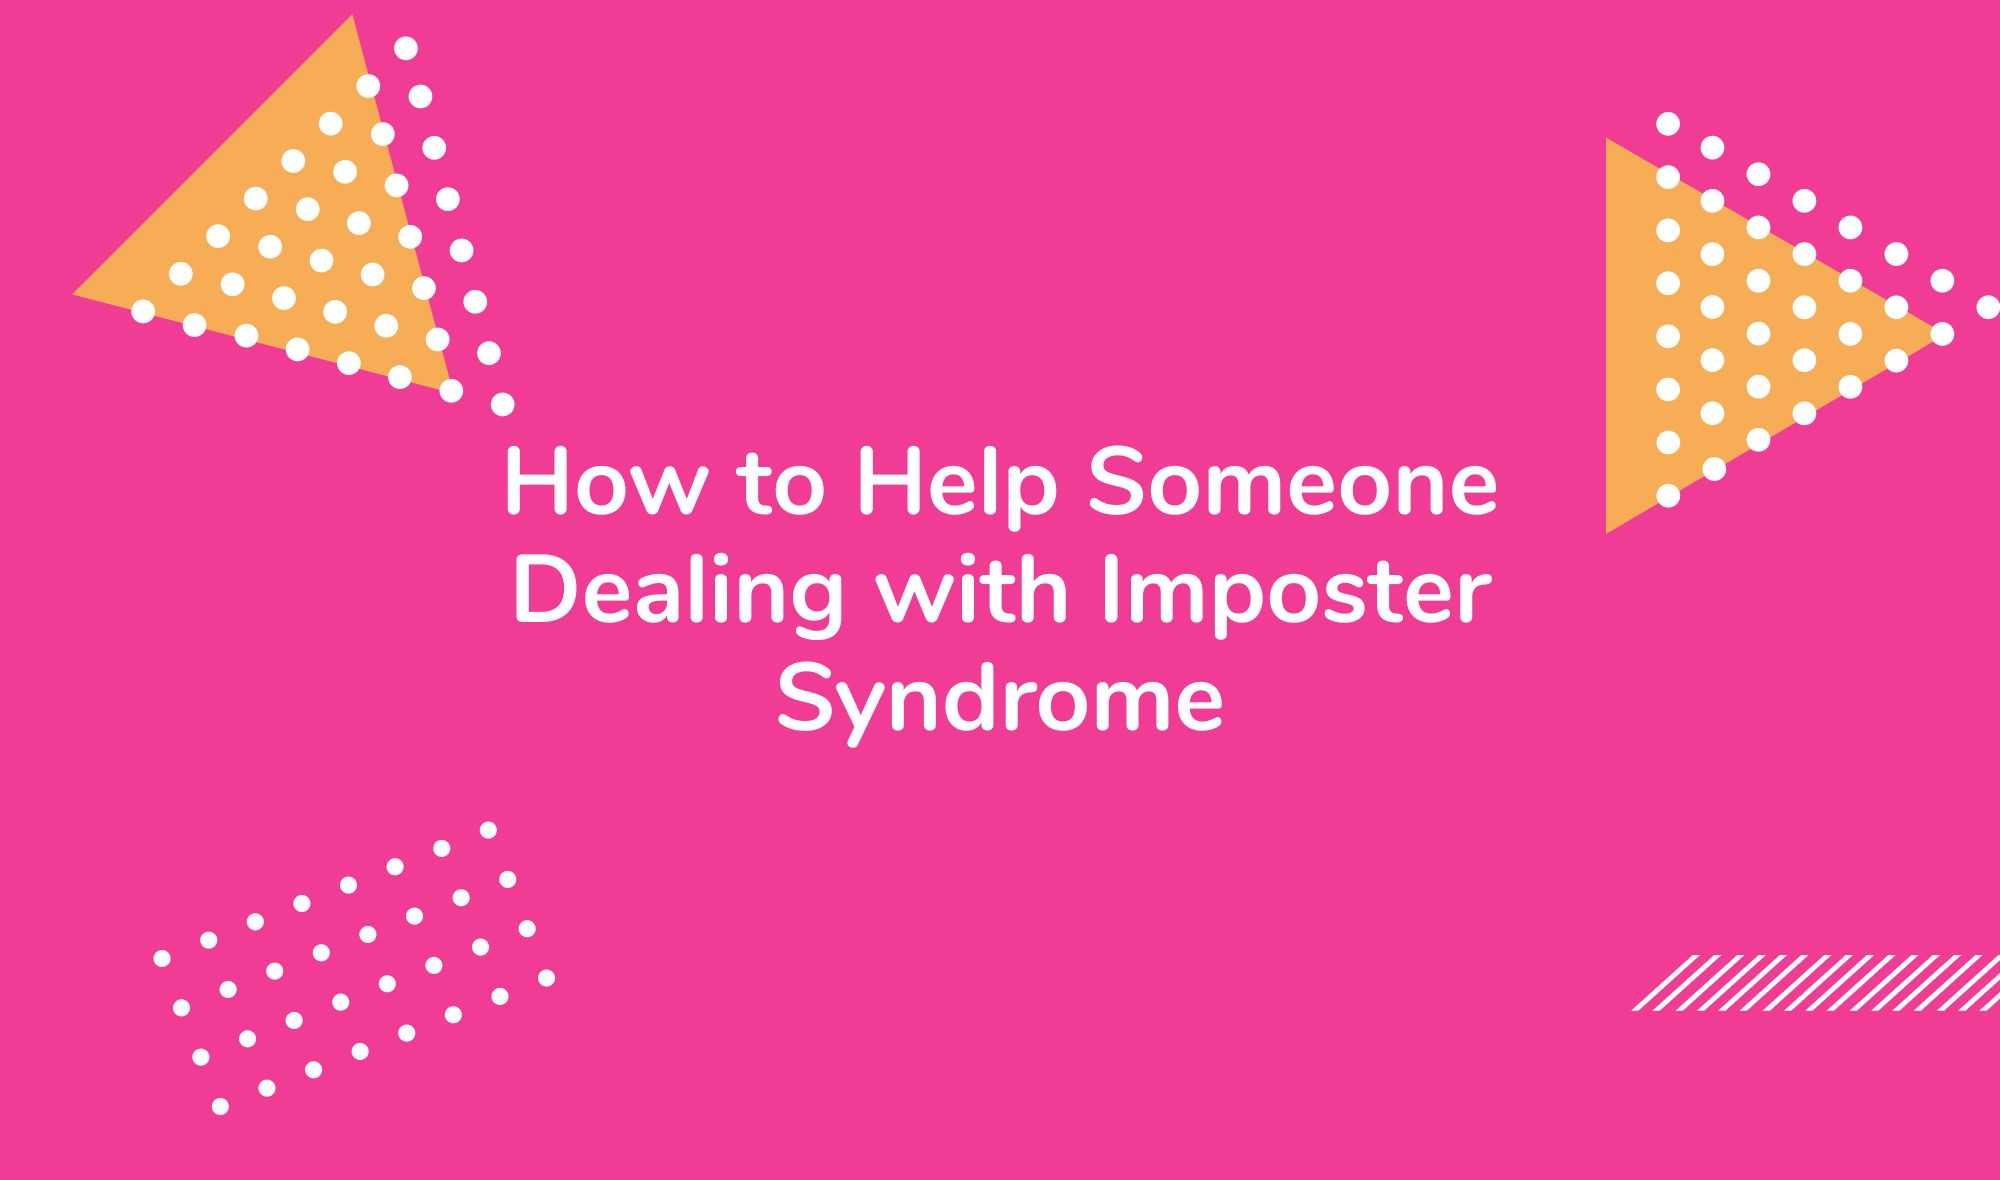 How to Help Someone Dealing with Imposter Syndrome